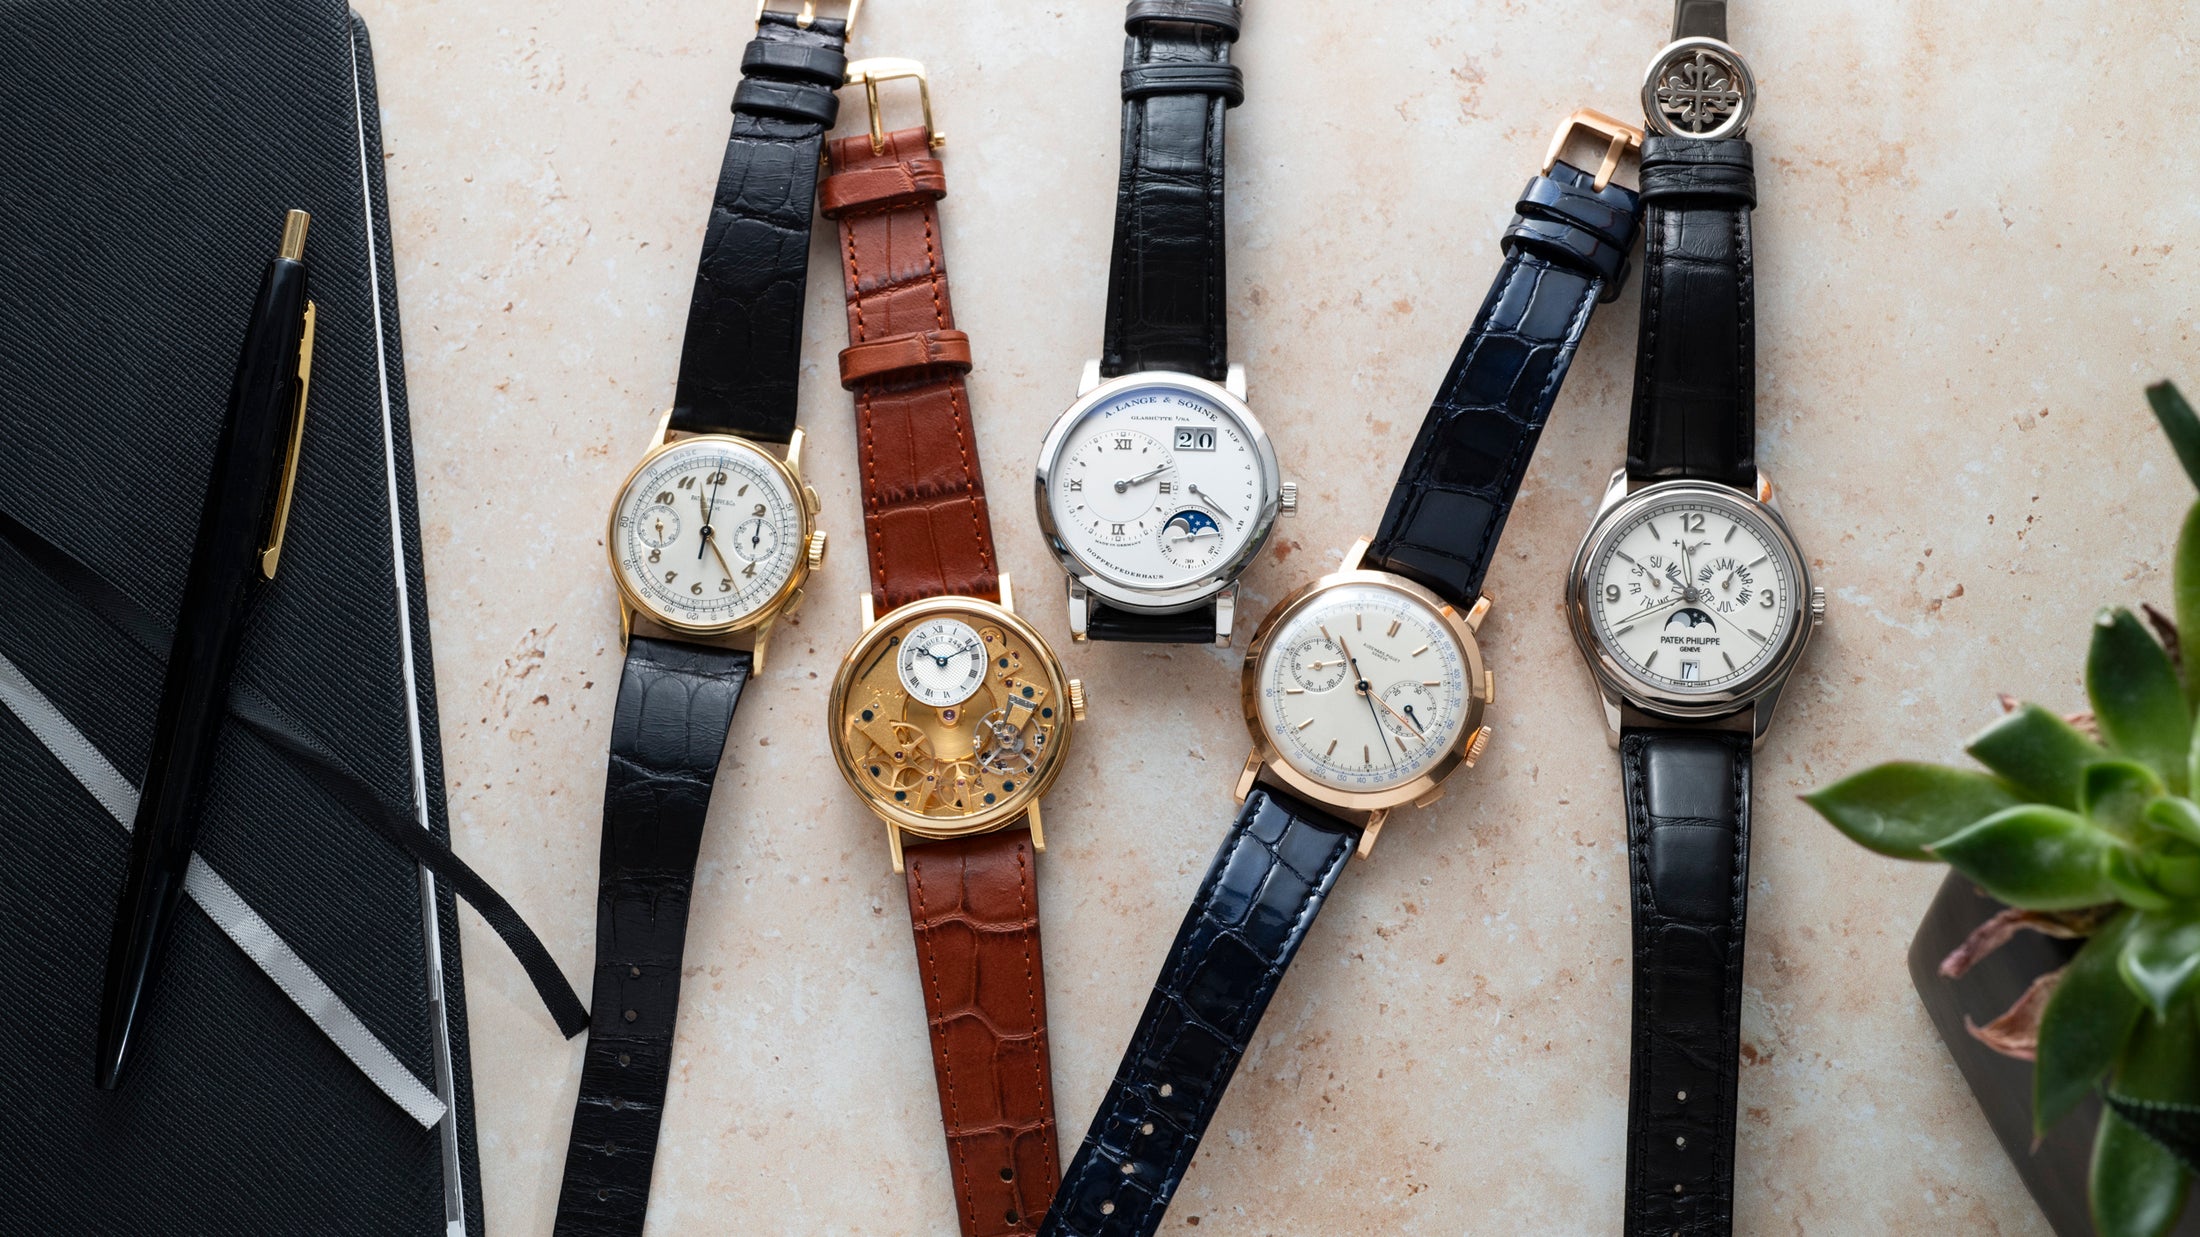 The A:S Guide to High-End Dress Watches